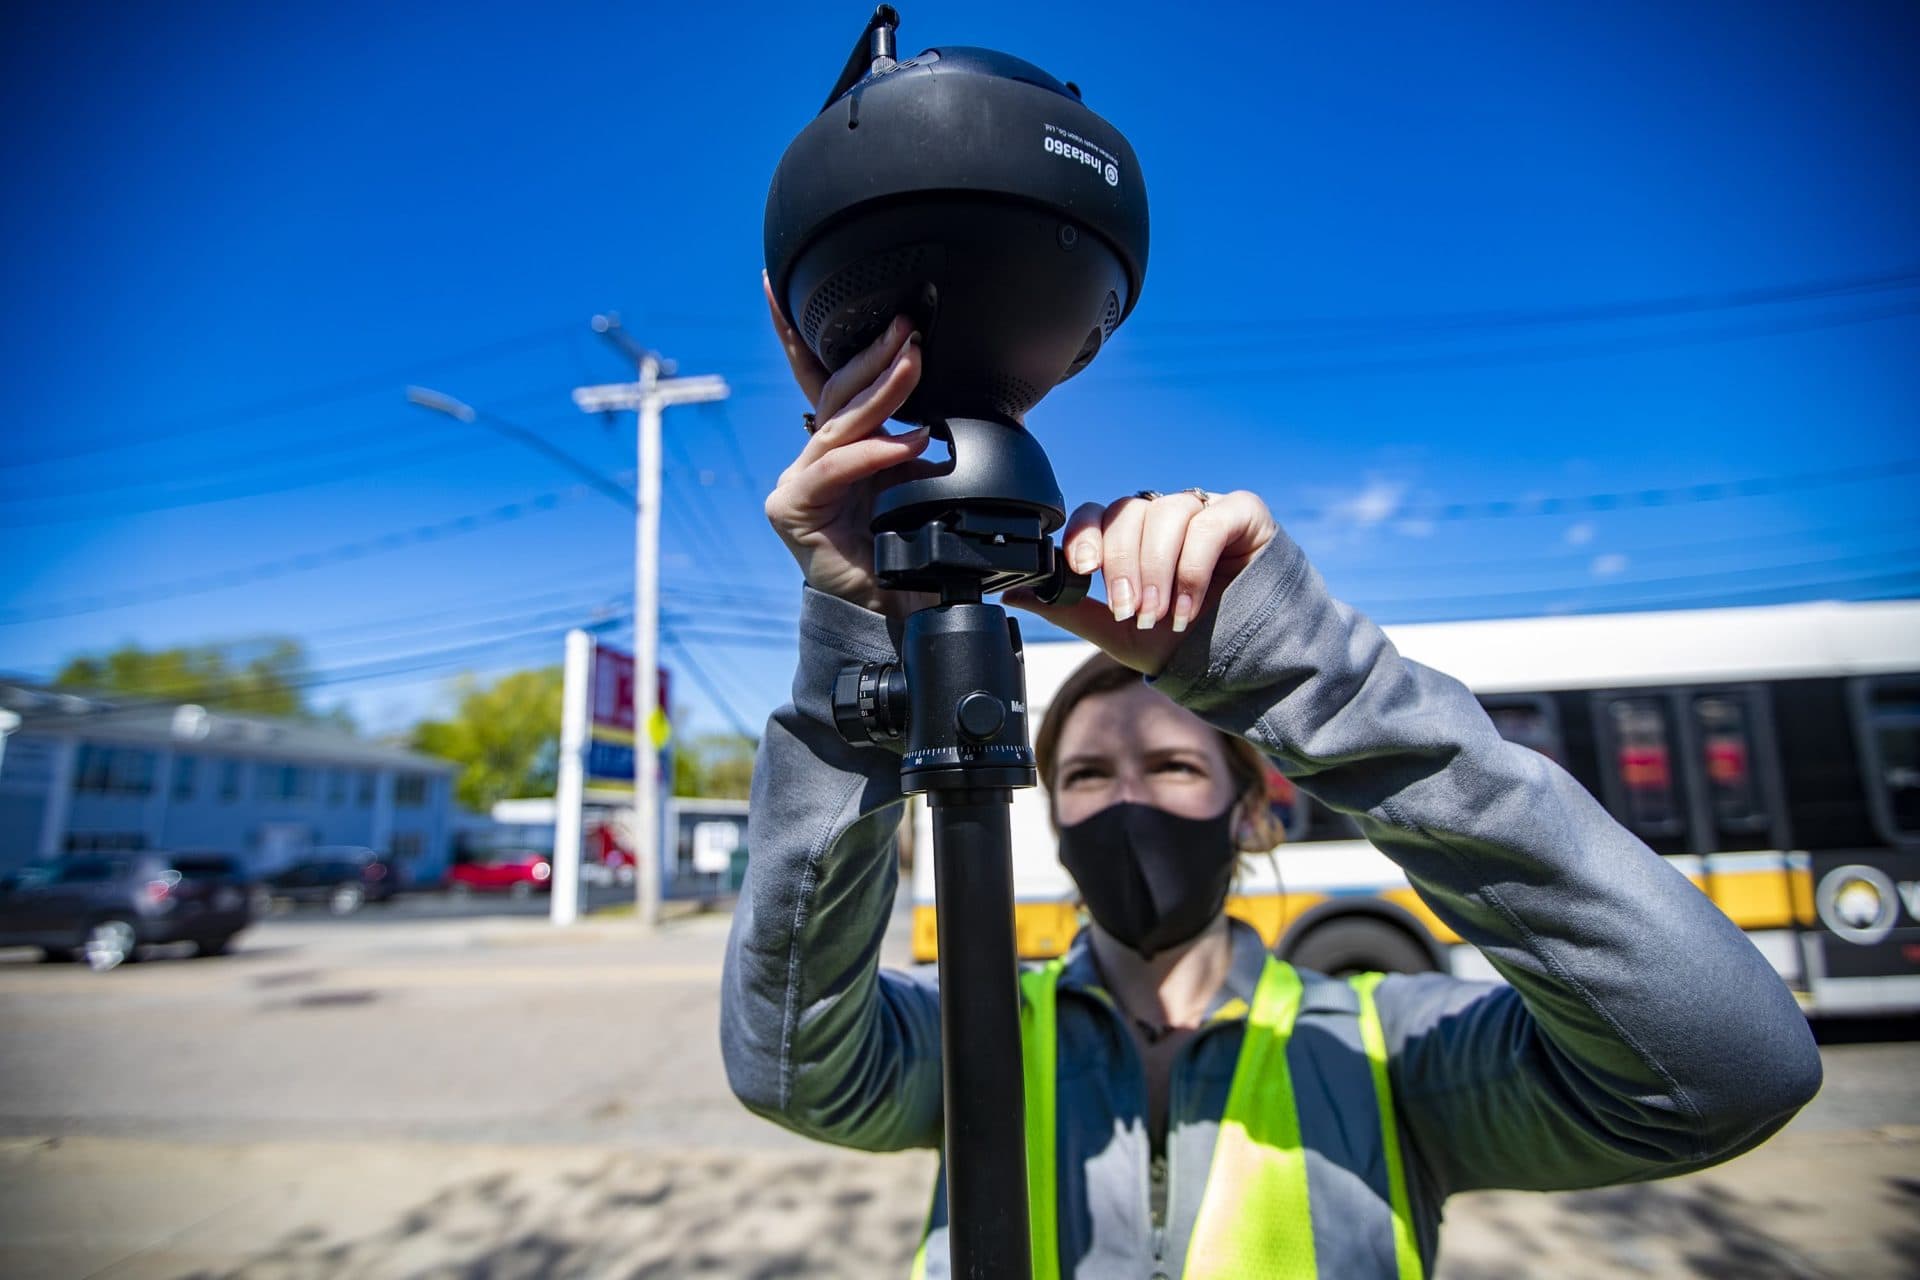 Engineer Madison Gleason sets up a 360 camera to survey the area around Hallet Street in Dorchester. (Jesse Costa/WBUR)